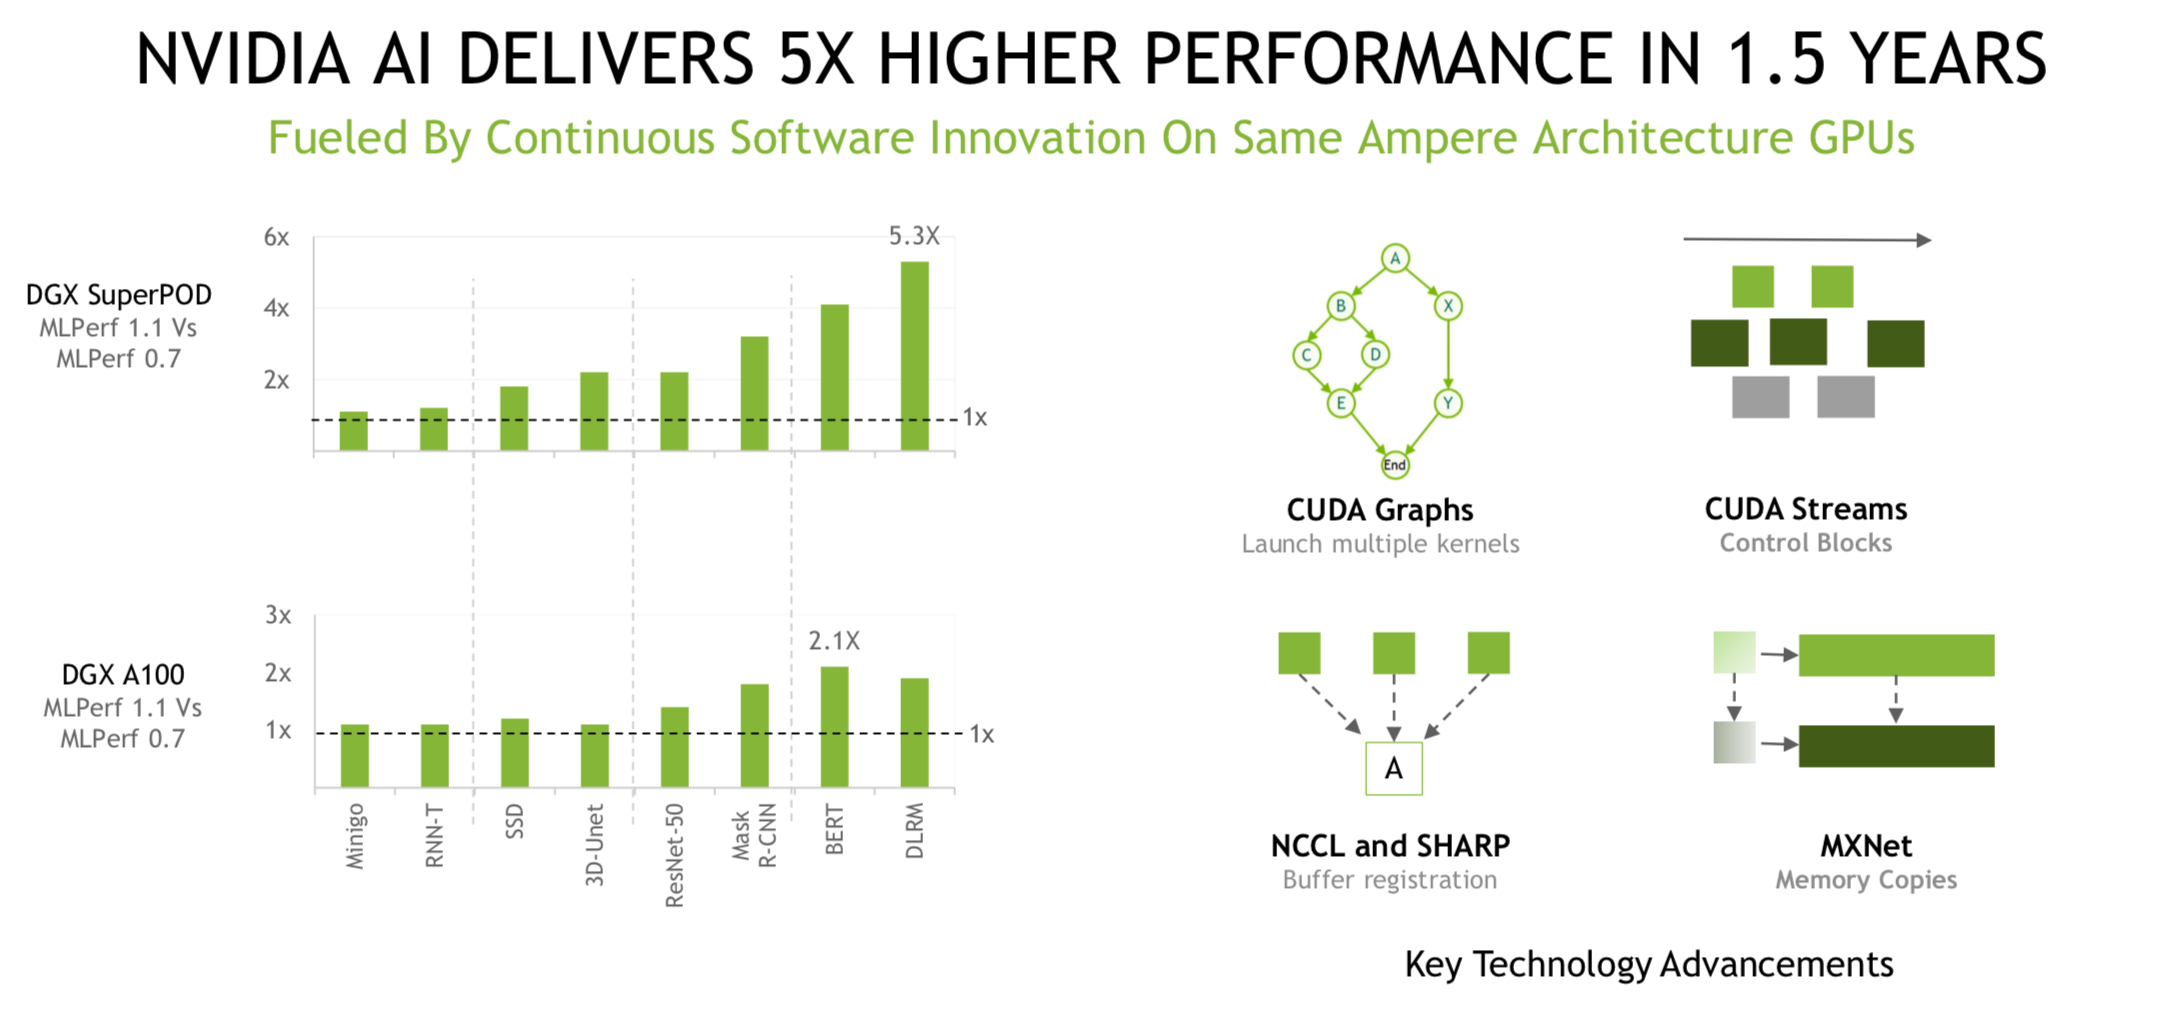 New MLPerf Benchmarks Show Why NVIDIA Reworked Its Product Roadmap